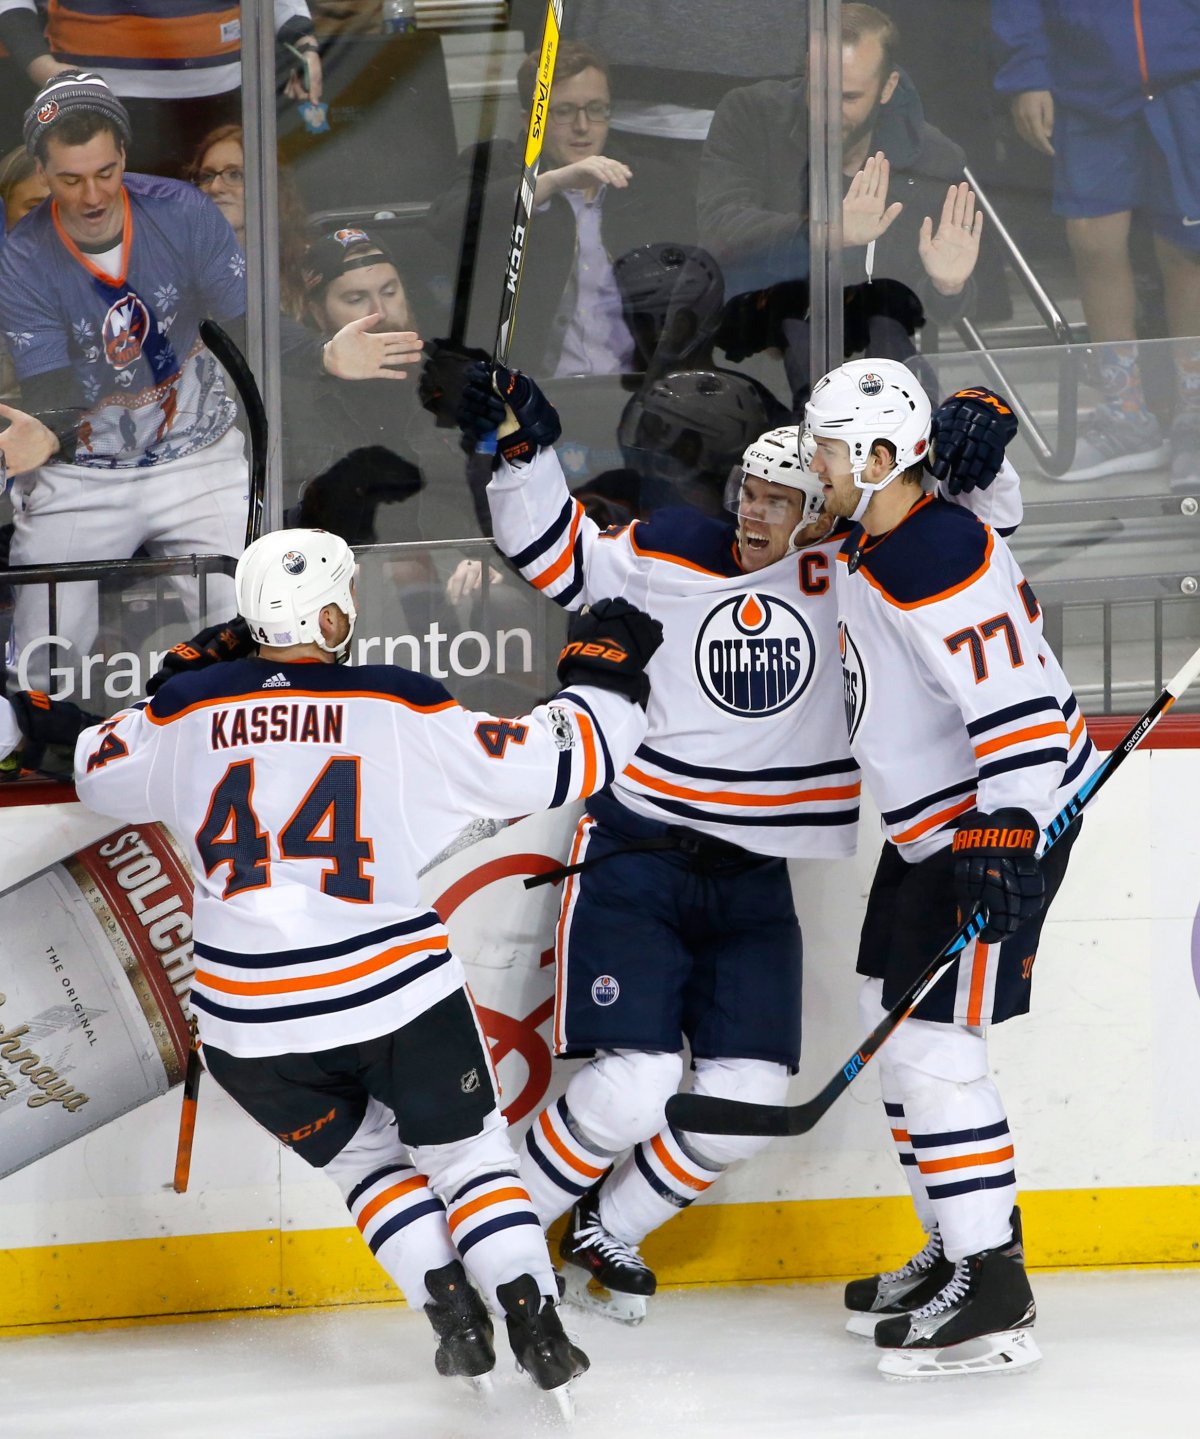 Edmonton Oilers right wing Zack Kassian (44) and Oilers defenseman Oscar Klefbom (77) of Sweden celebrate with Oilers center Connor McDavid (97) after McDavid scored the game-winning goal in overtime of an NHL hockey game against the New York Islanders in New York, Tuesday, Nov. 7, 2017. The final score was 2-1. 